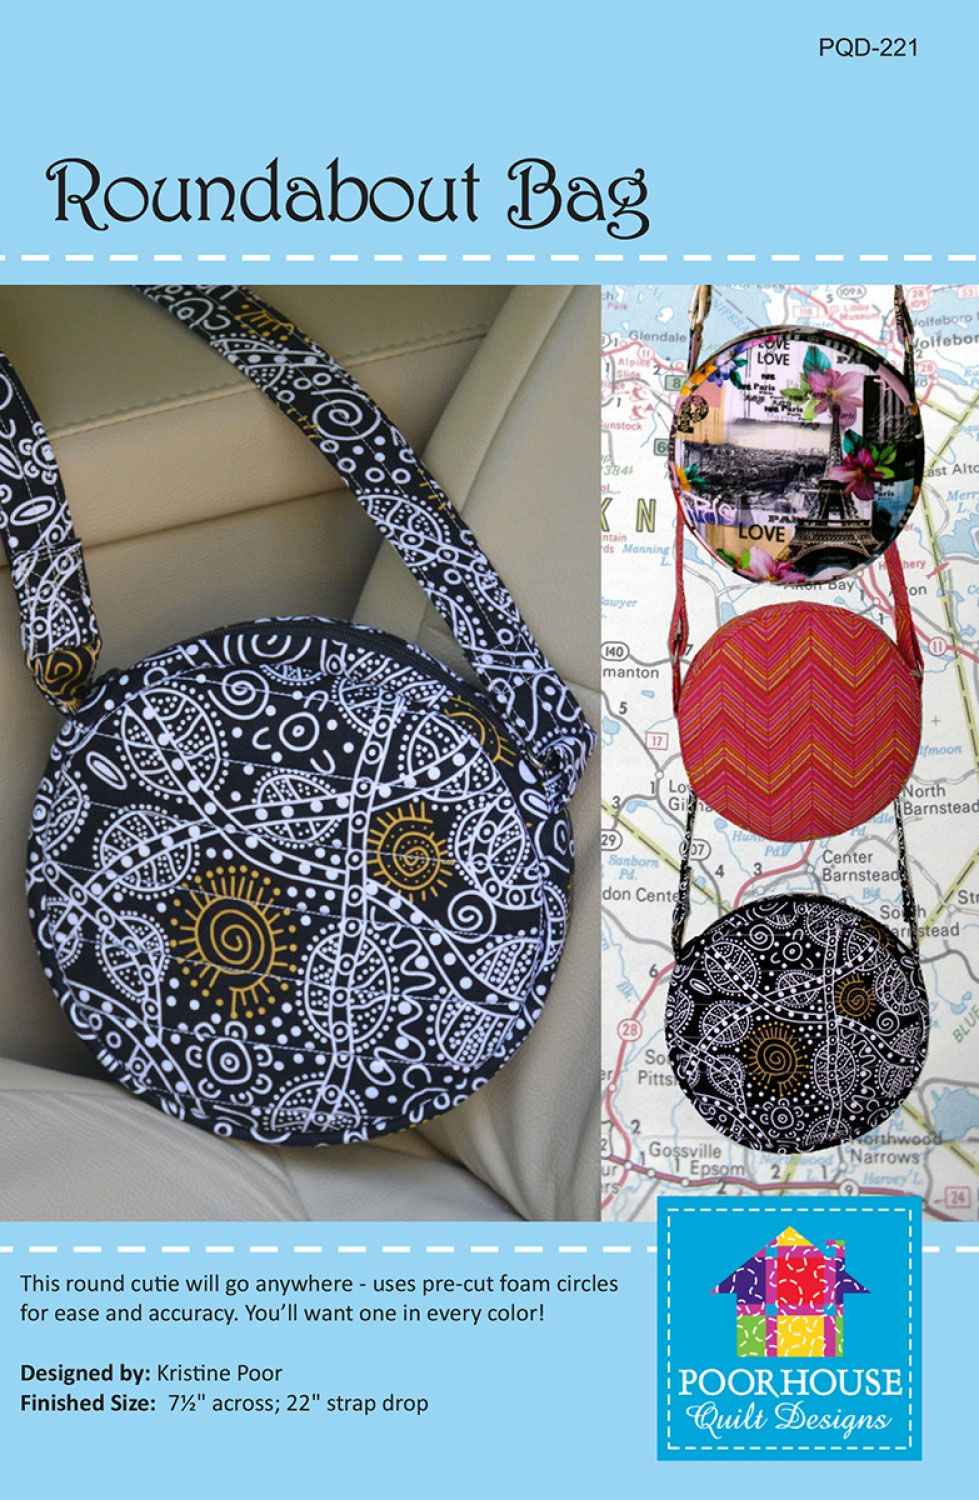 Roundabout-Bag-sewing-pattern-Poorhouse-Designs-front